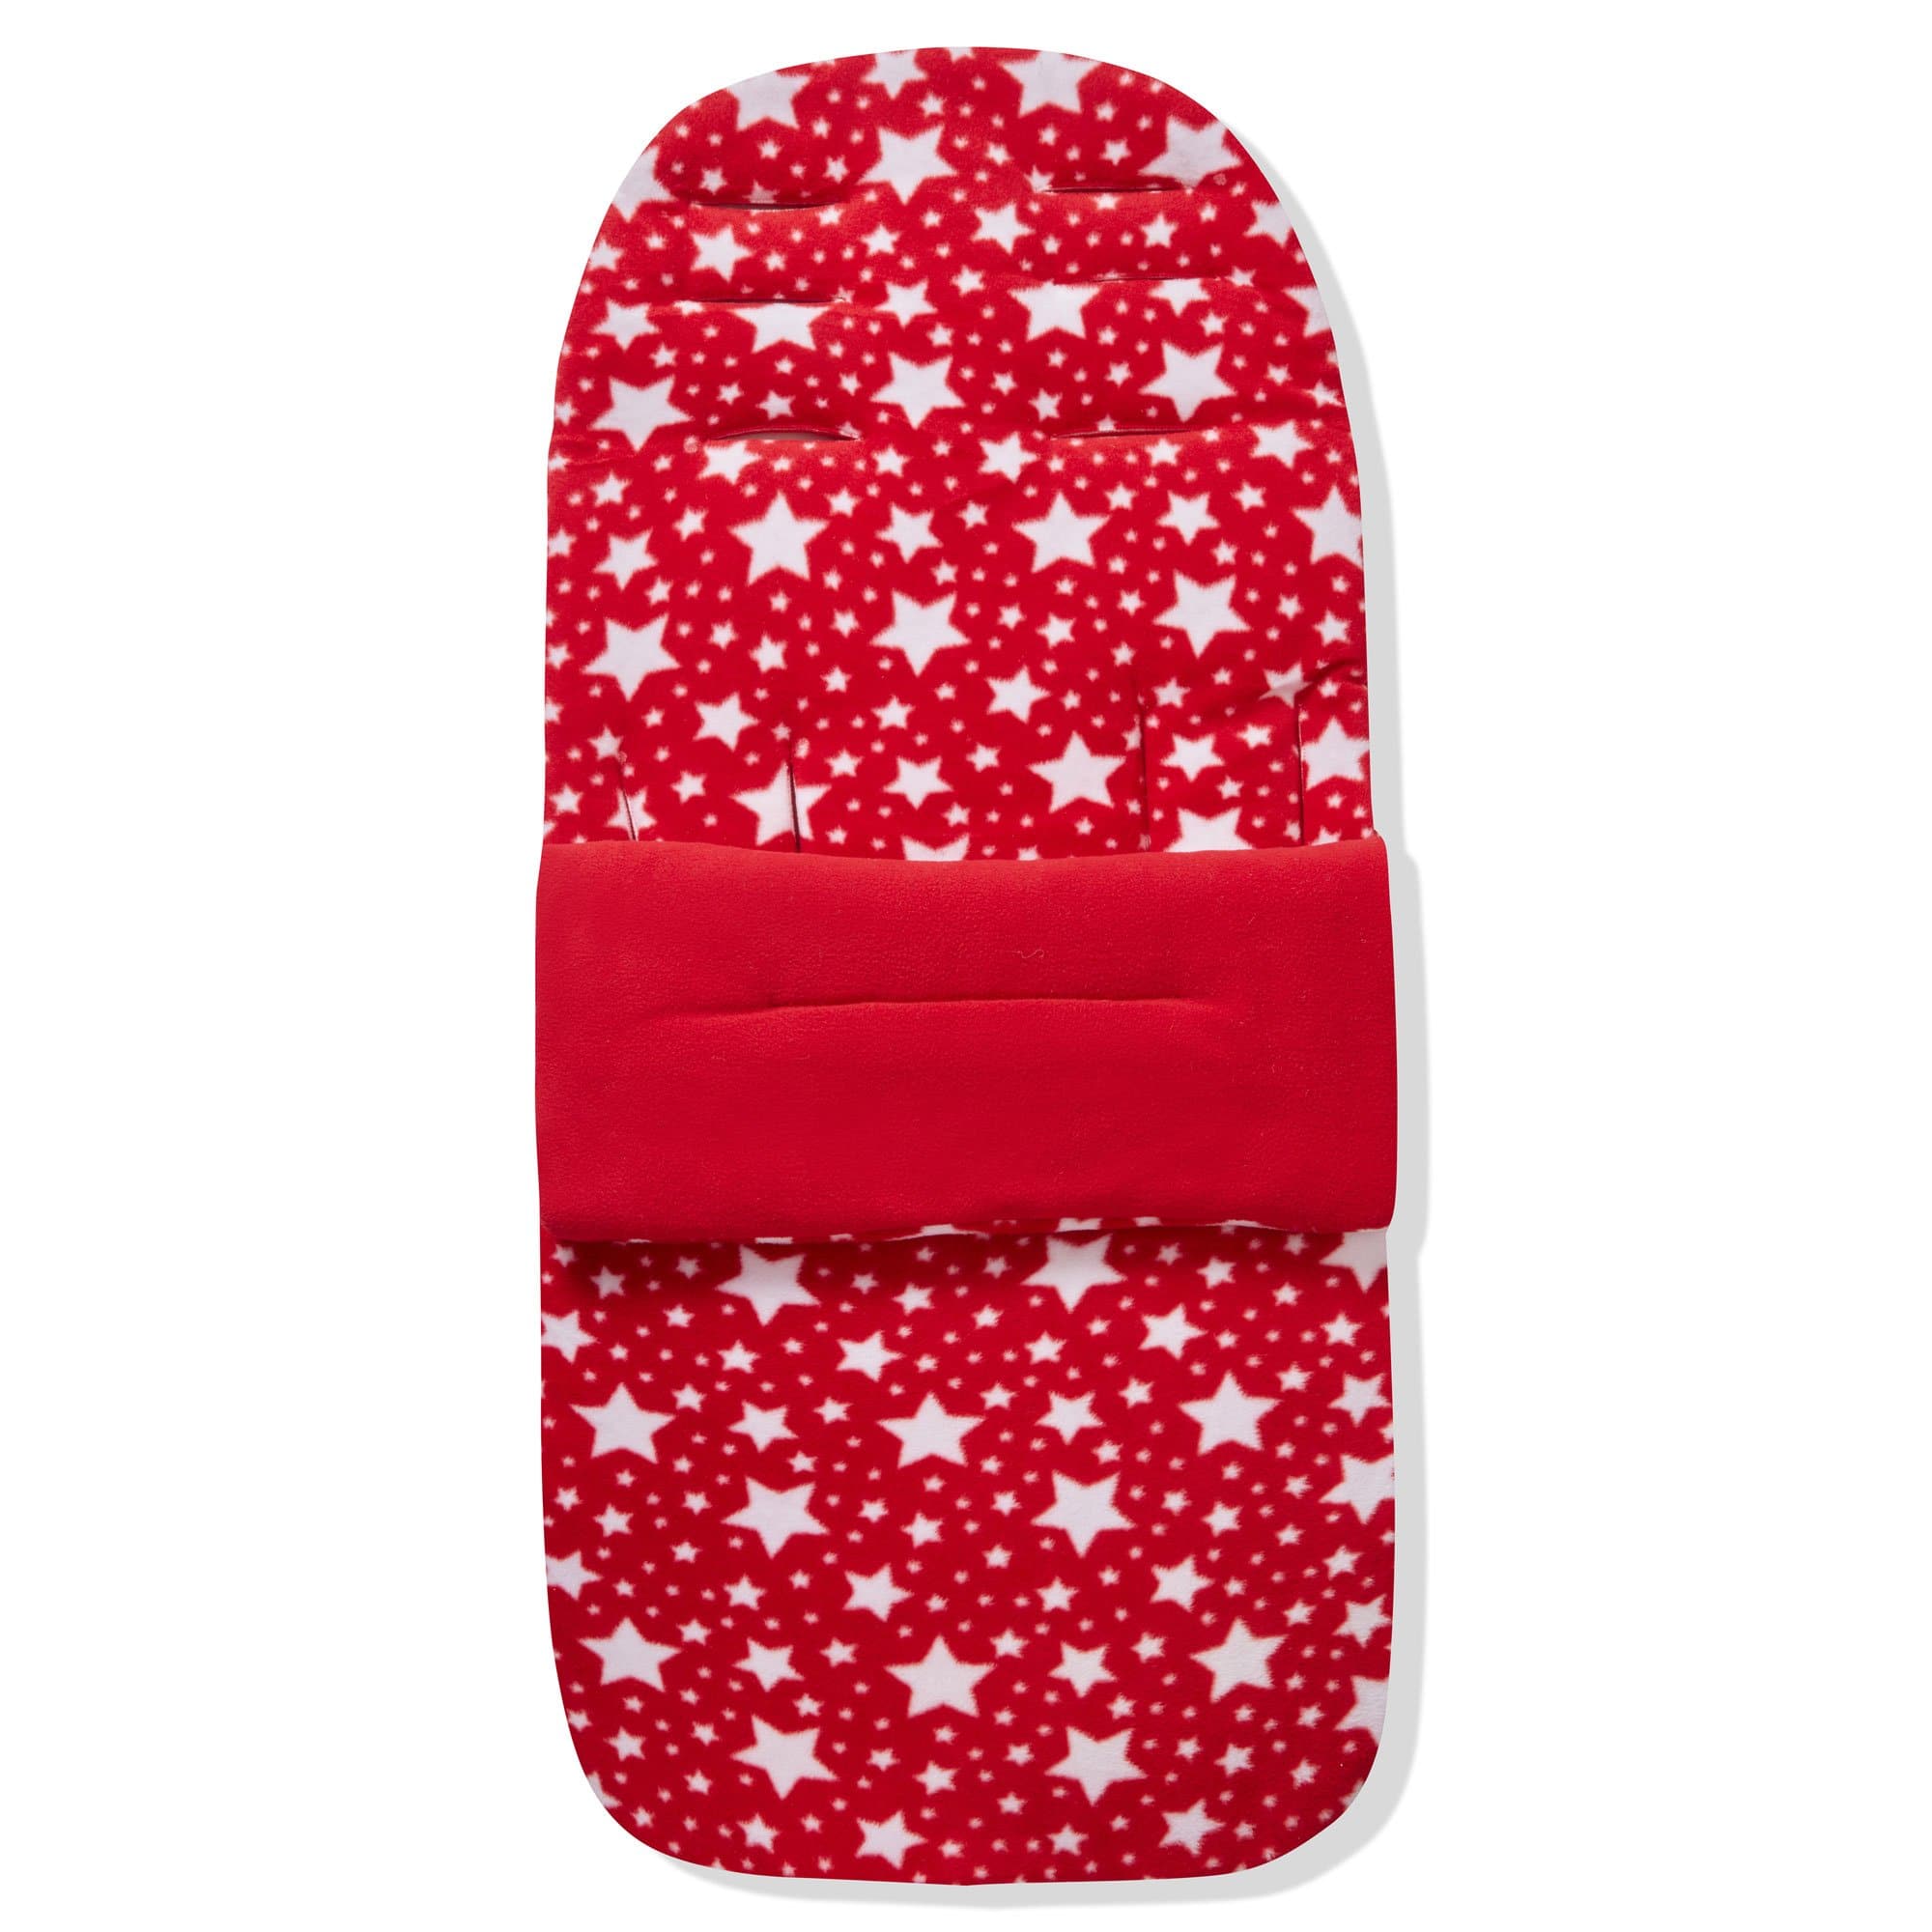 Fleece Footmuff / Cosy Toes Compatible with Cybex - Red Star / Fits All Models | For Your Little One